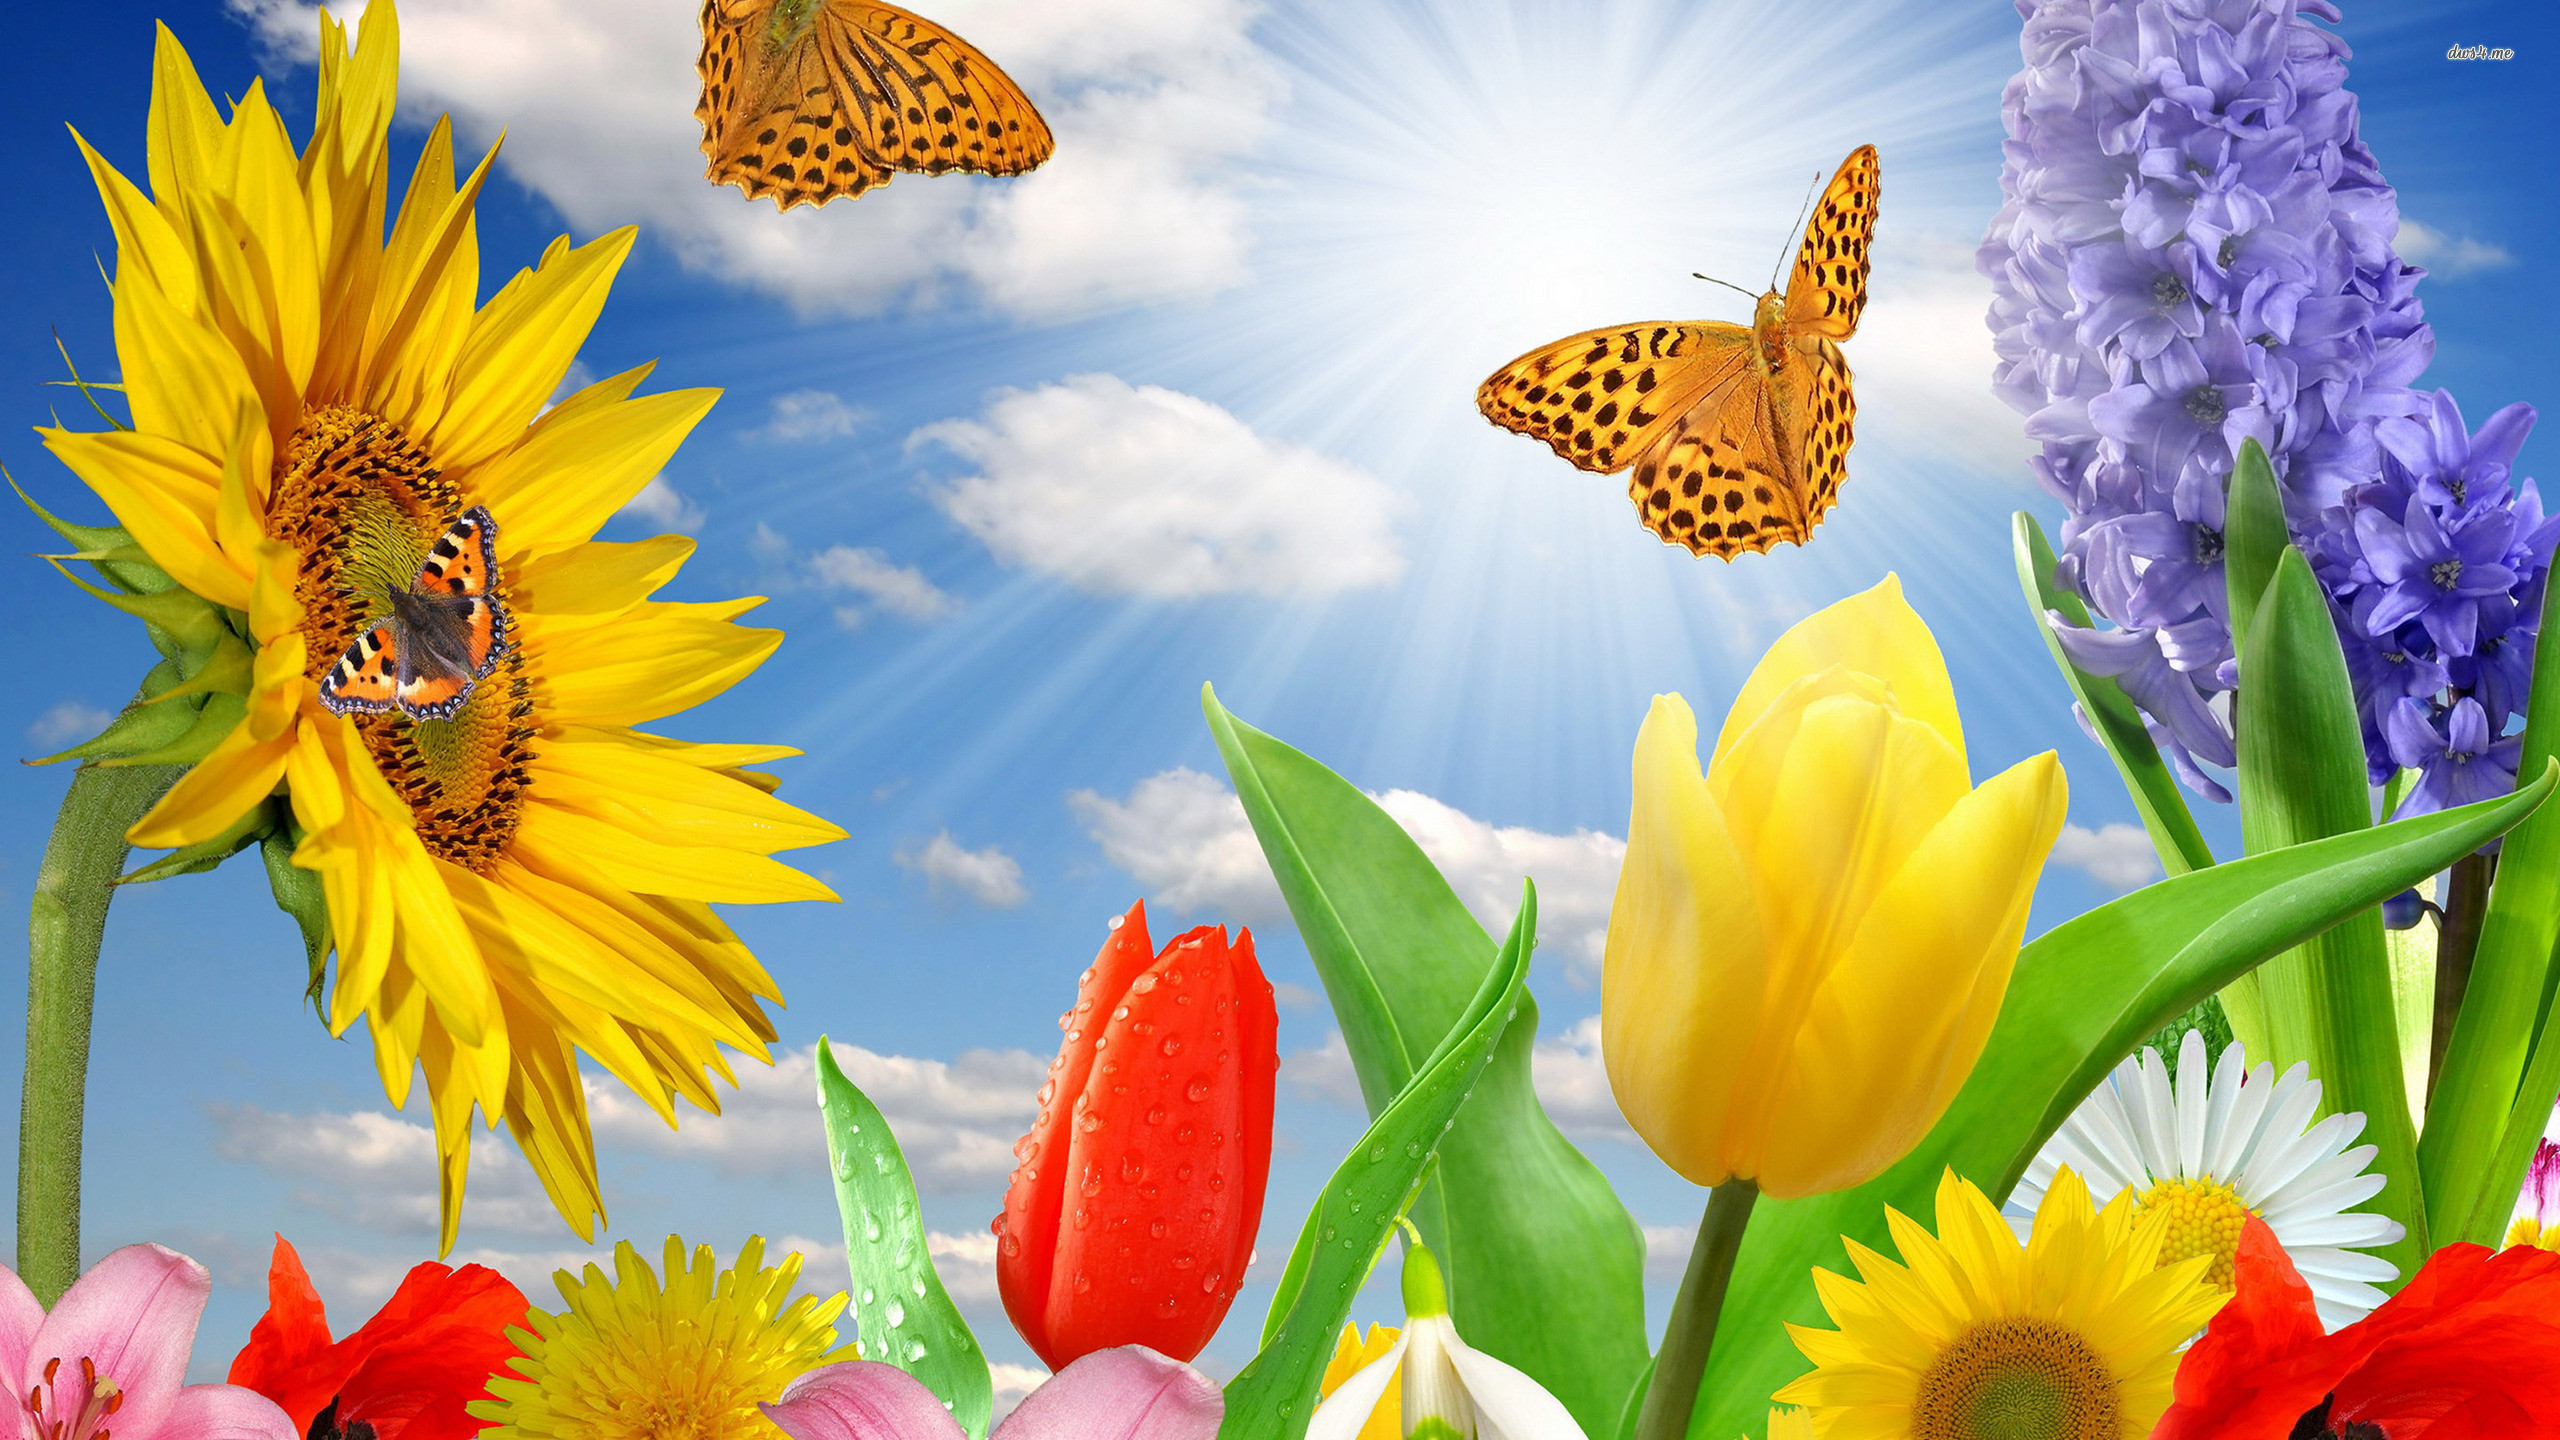 Spring Flowers And Butterflies Background Hd Cool 7 - HD Wallpaper 